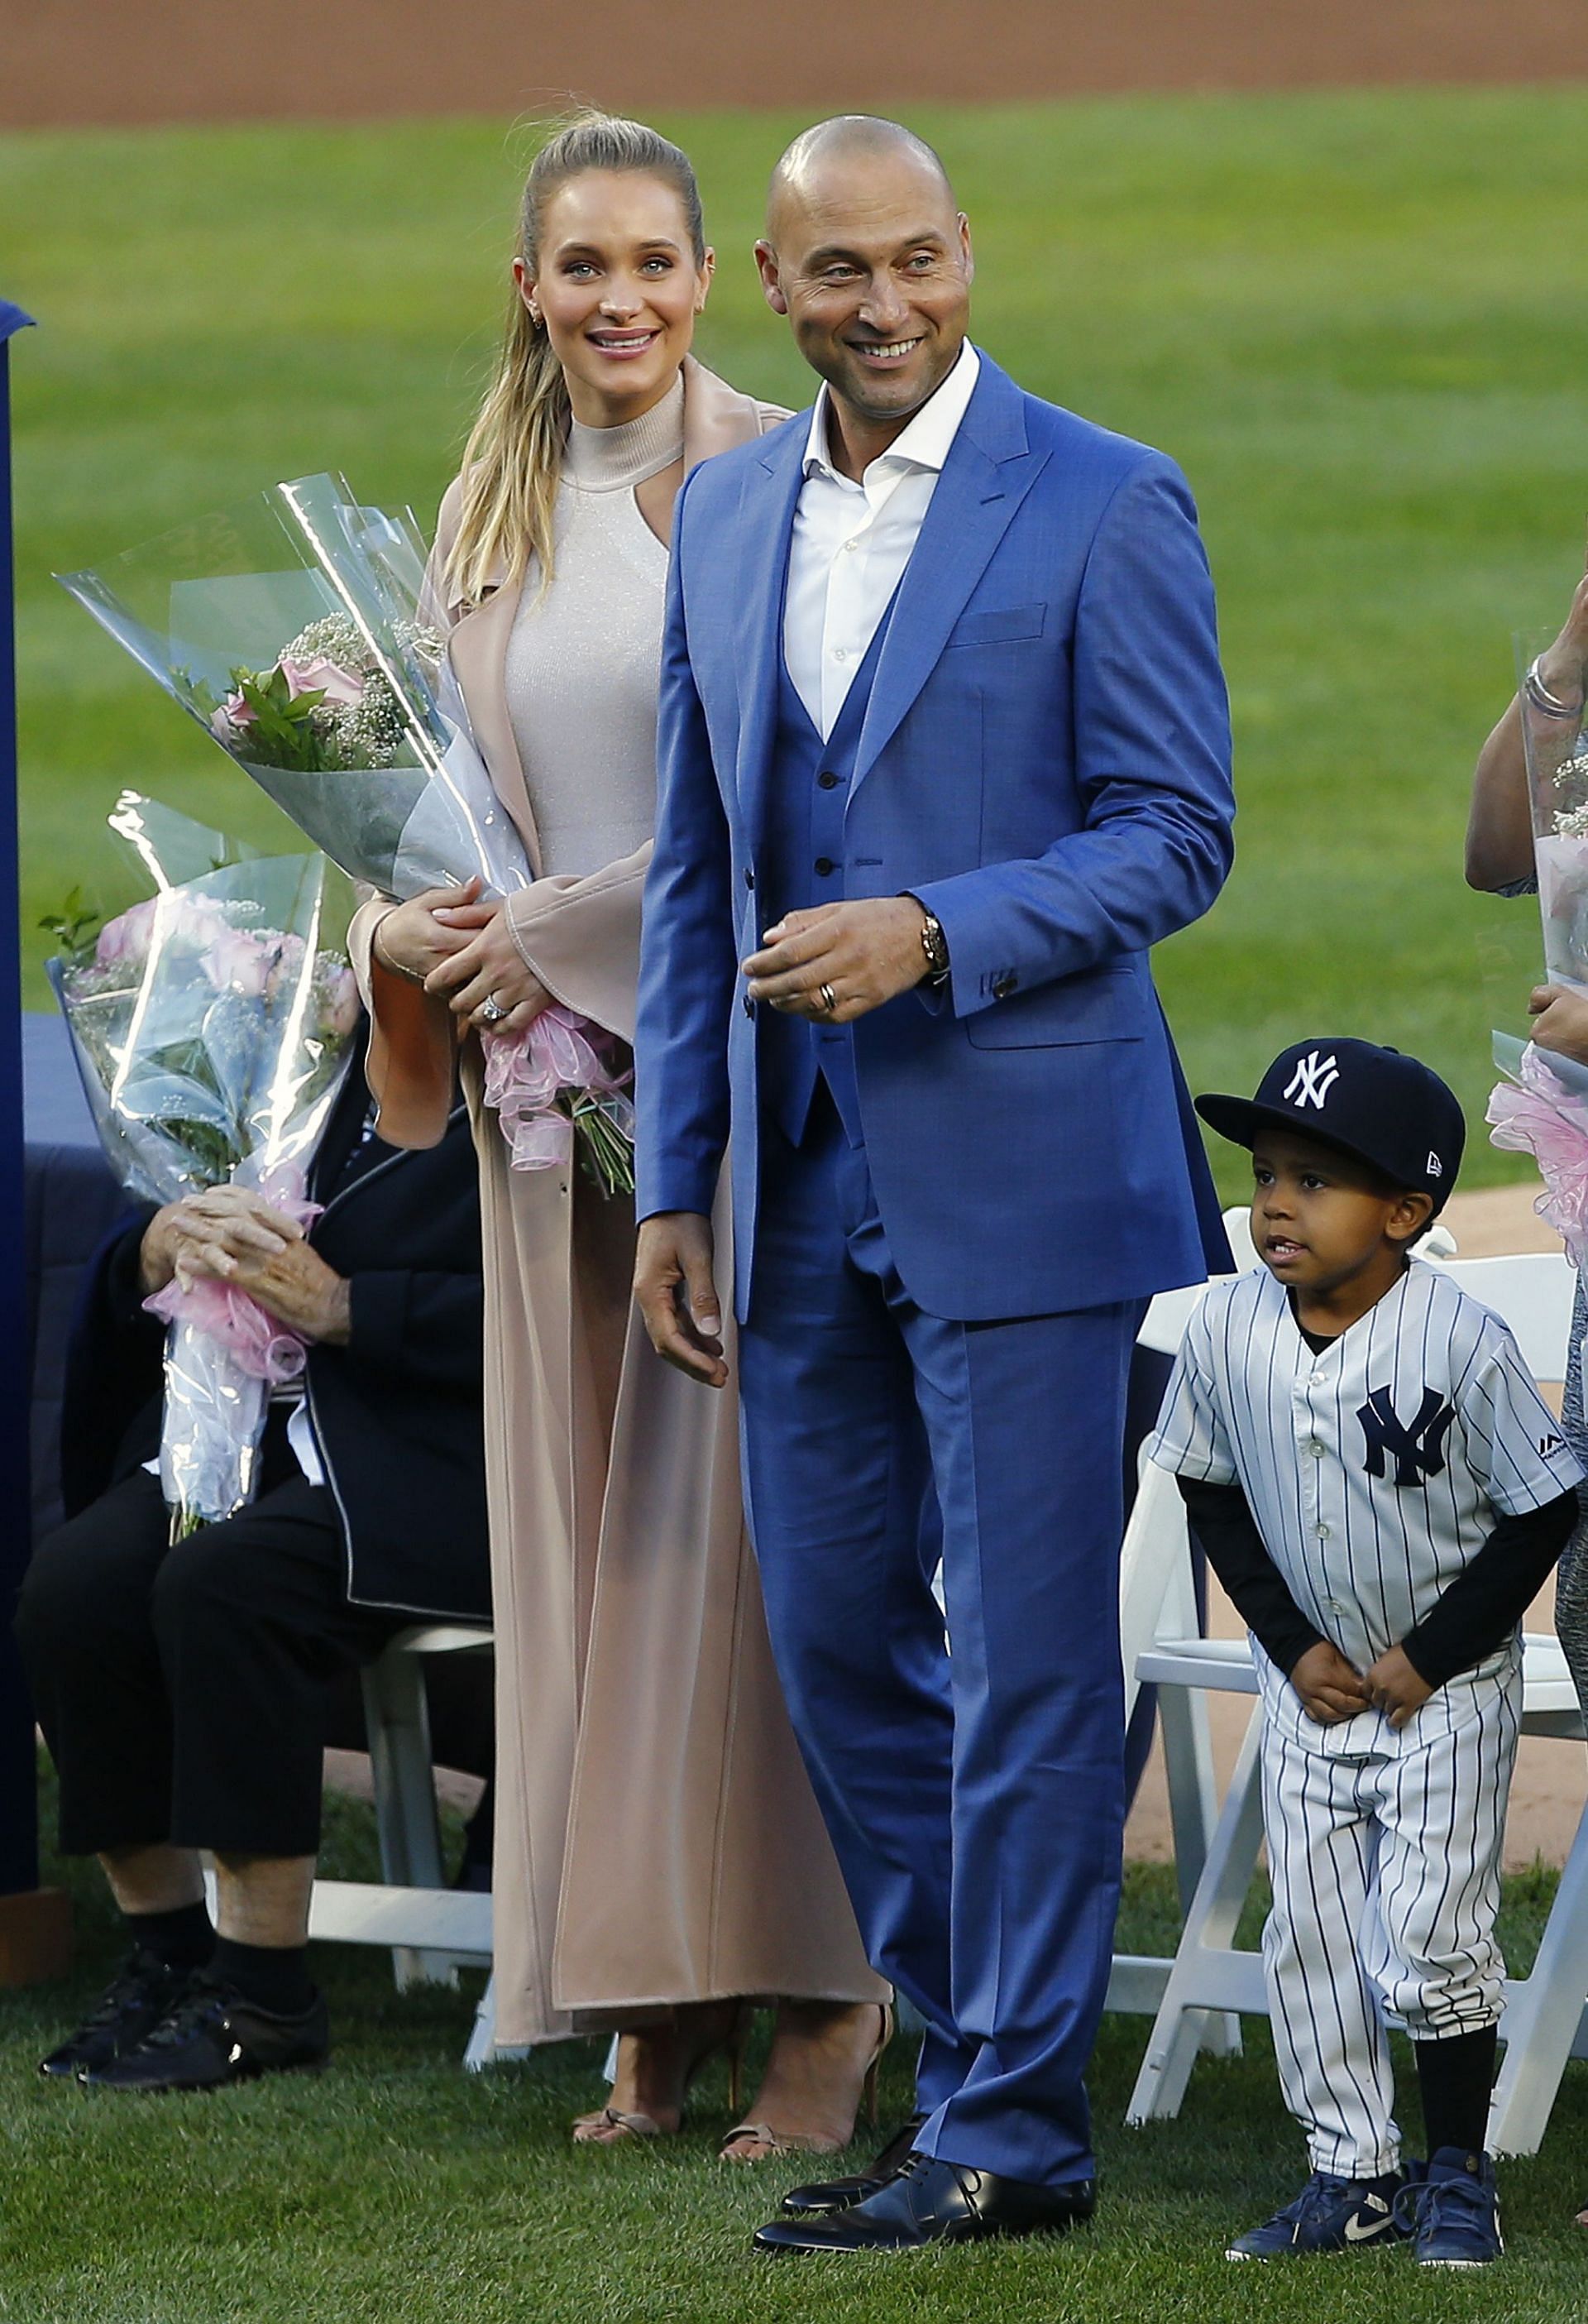 Derek Jeter and his wife tied the knot in 2016, two years after retiring from MLB